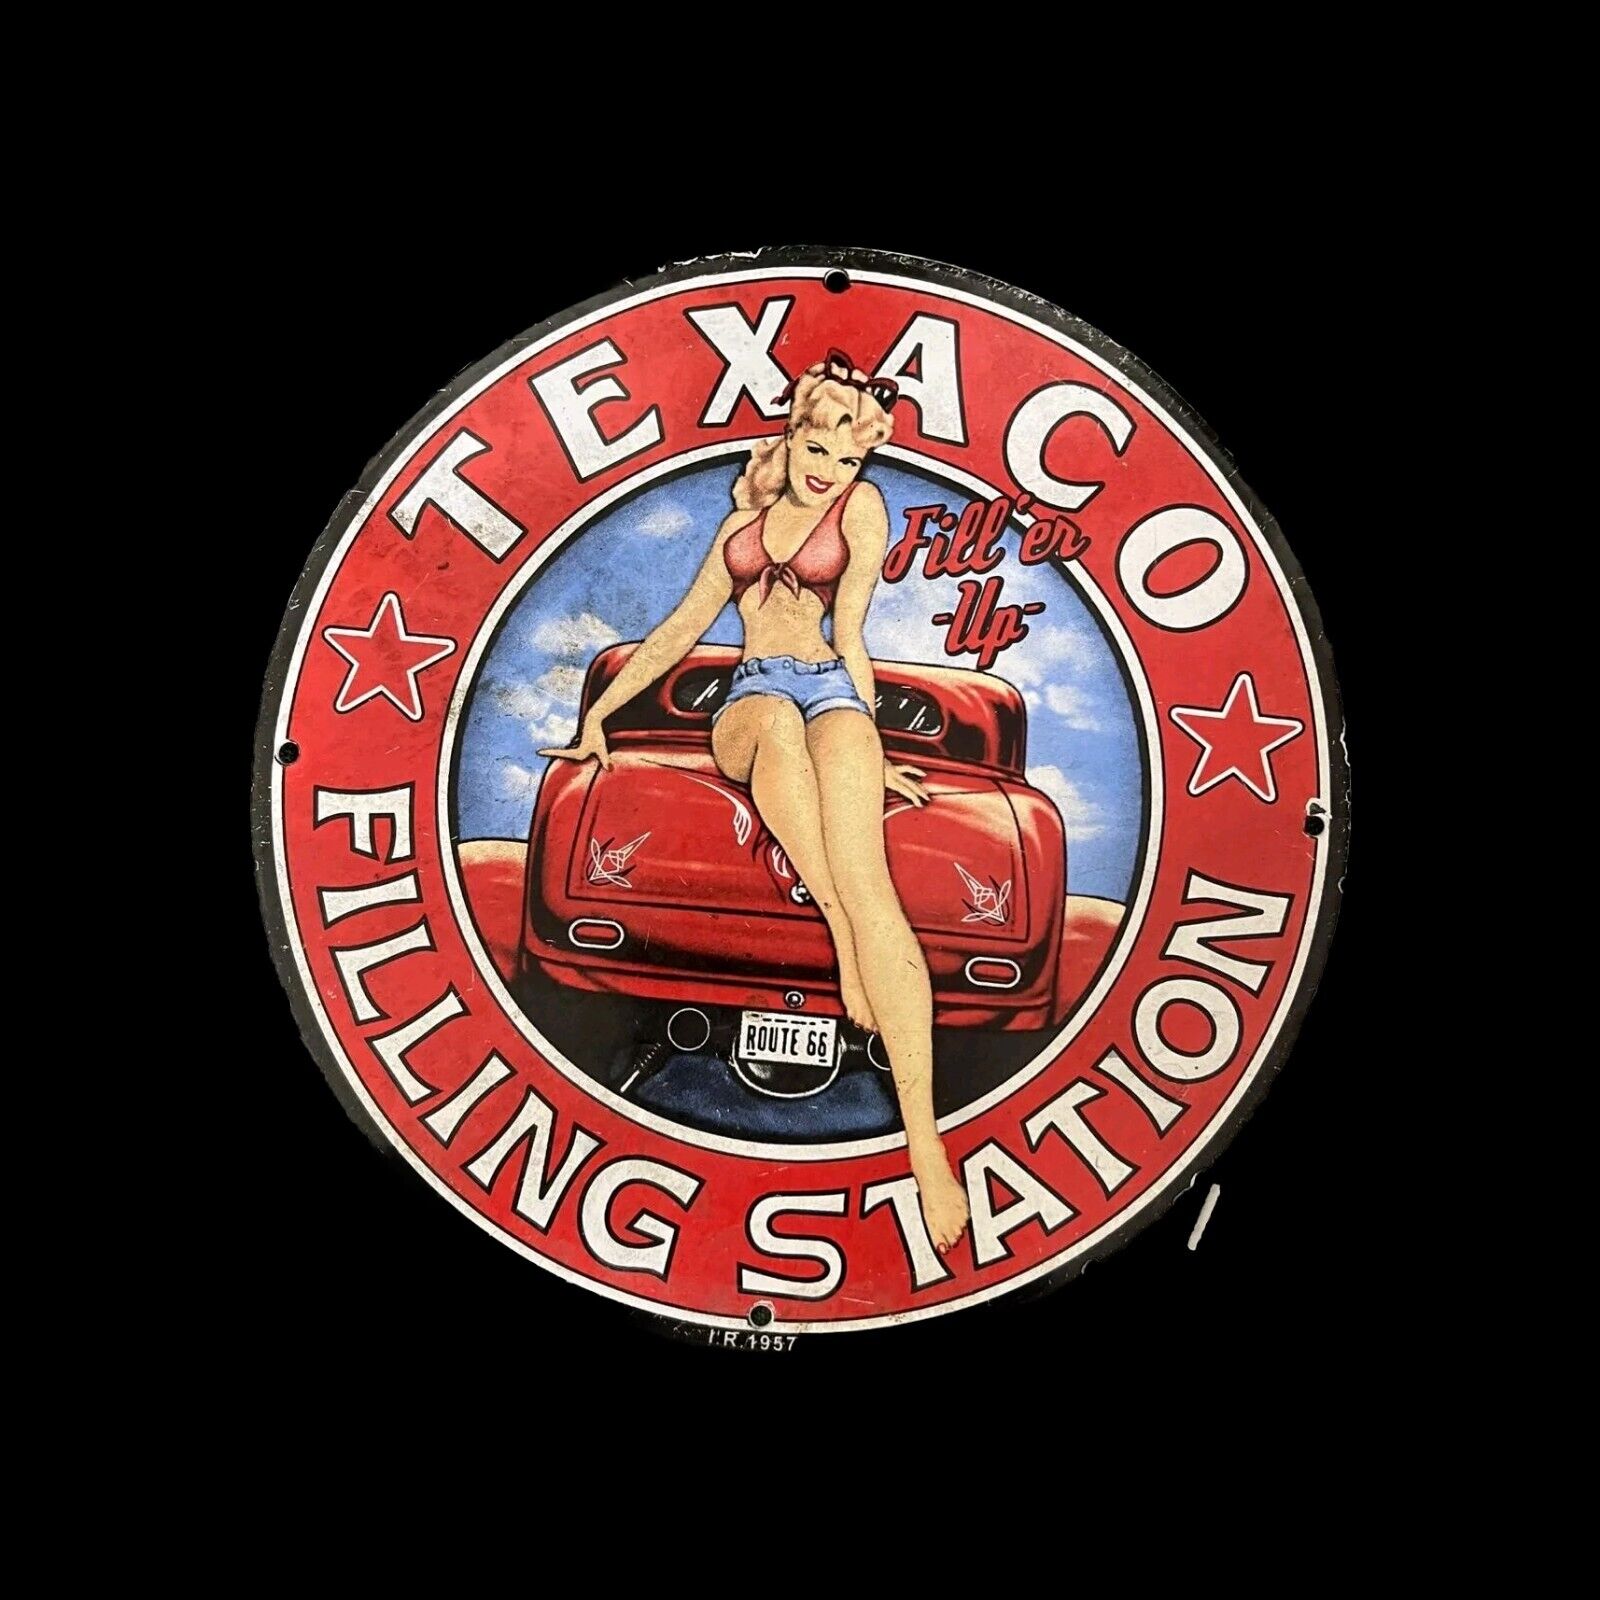 RARE TEXACO FILLING STATION PINUP GIRL STYLE PORCELAIN GAS PUMP OIL SEEVICE SIGN